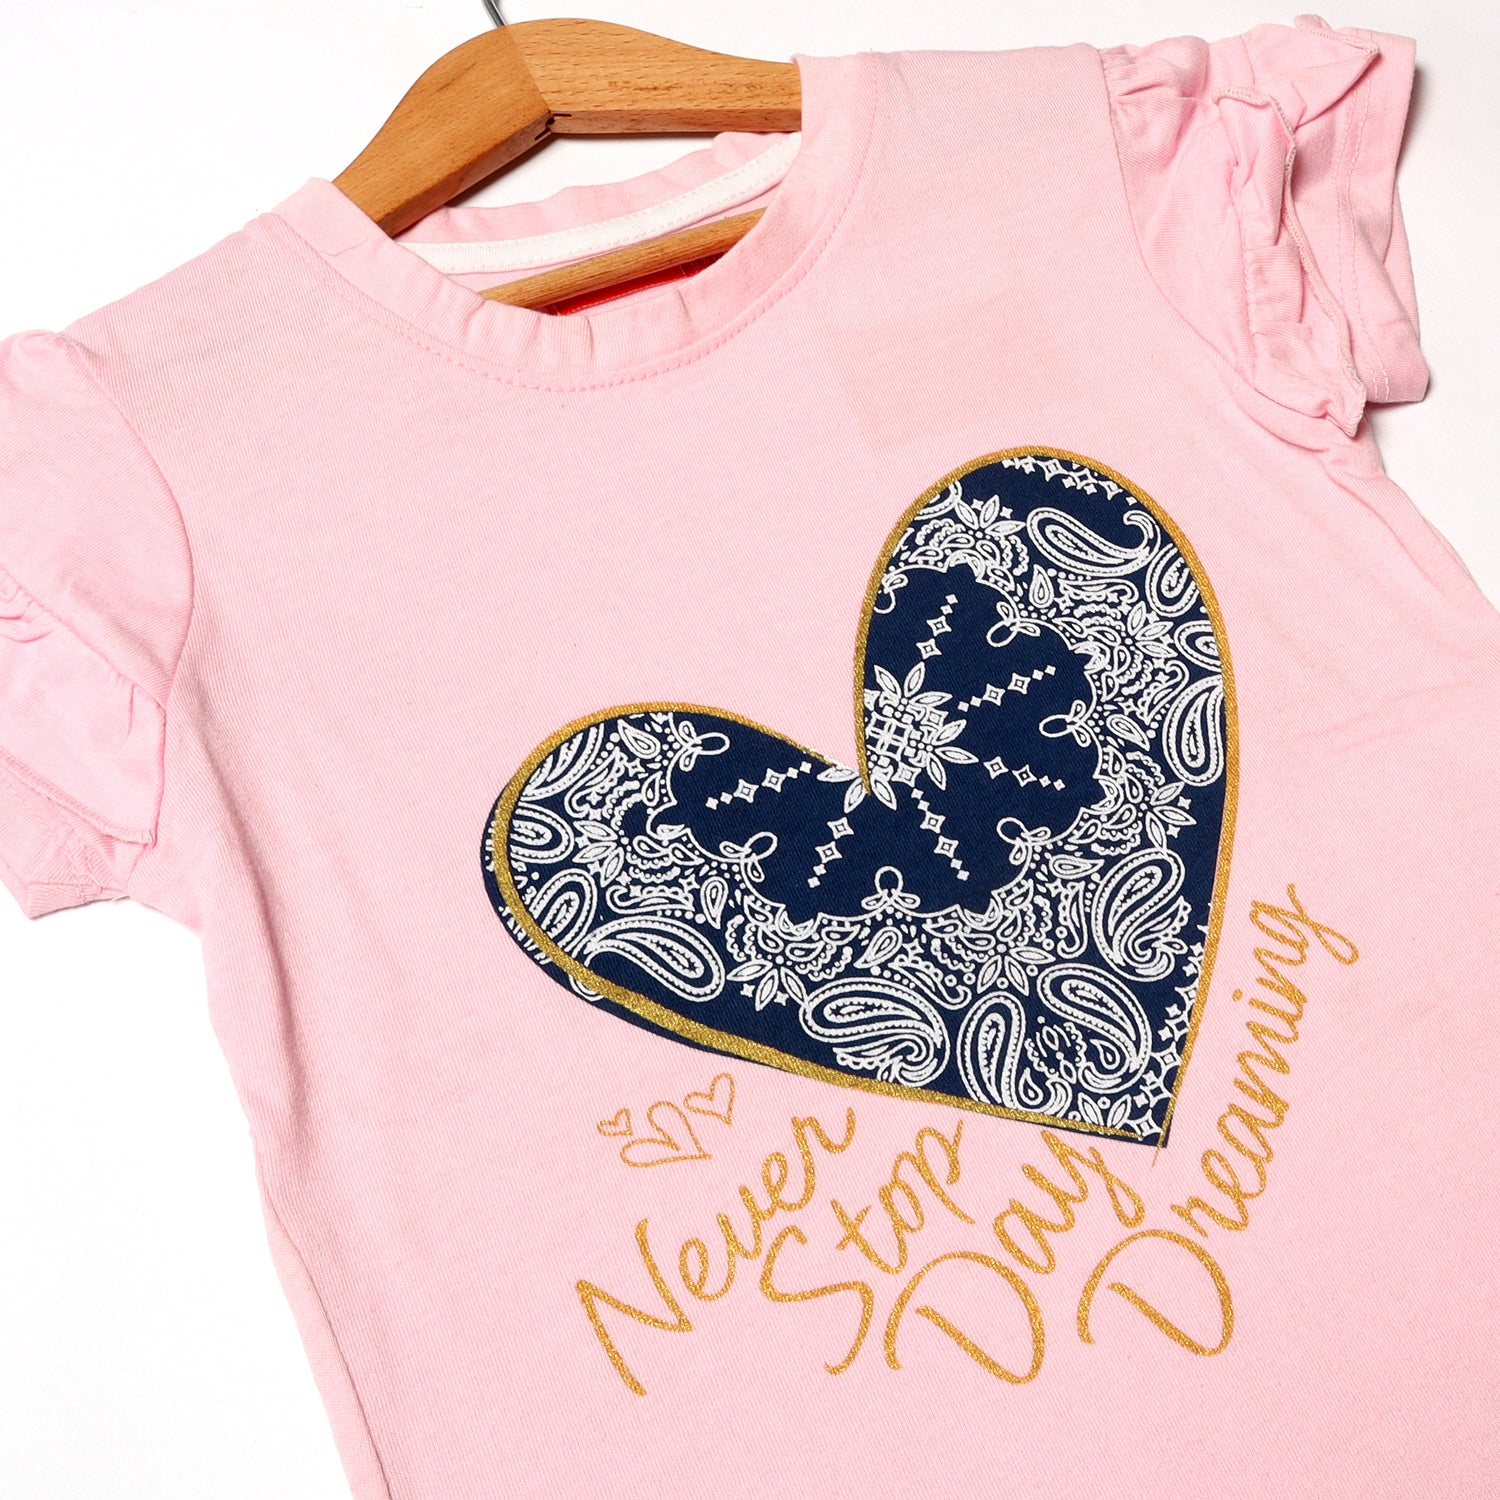 PINK NEVER STOP DAY DREAMING PRINTED T-SHIRT FOR GIRLS